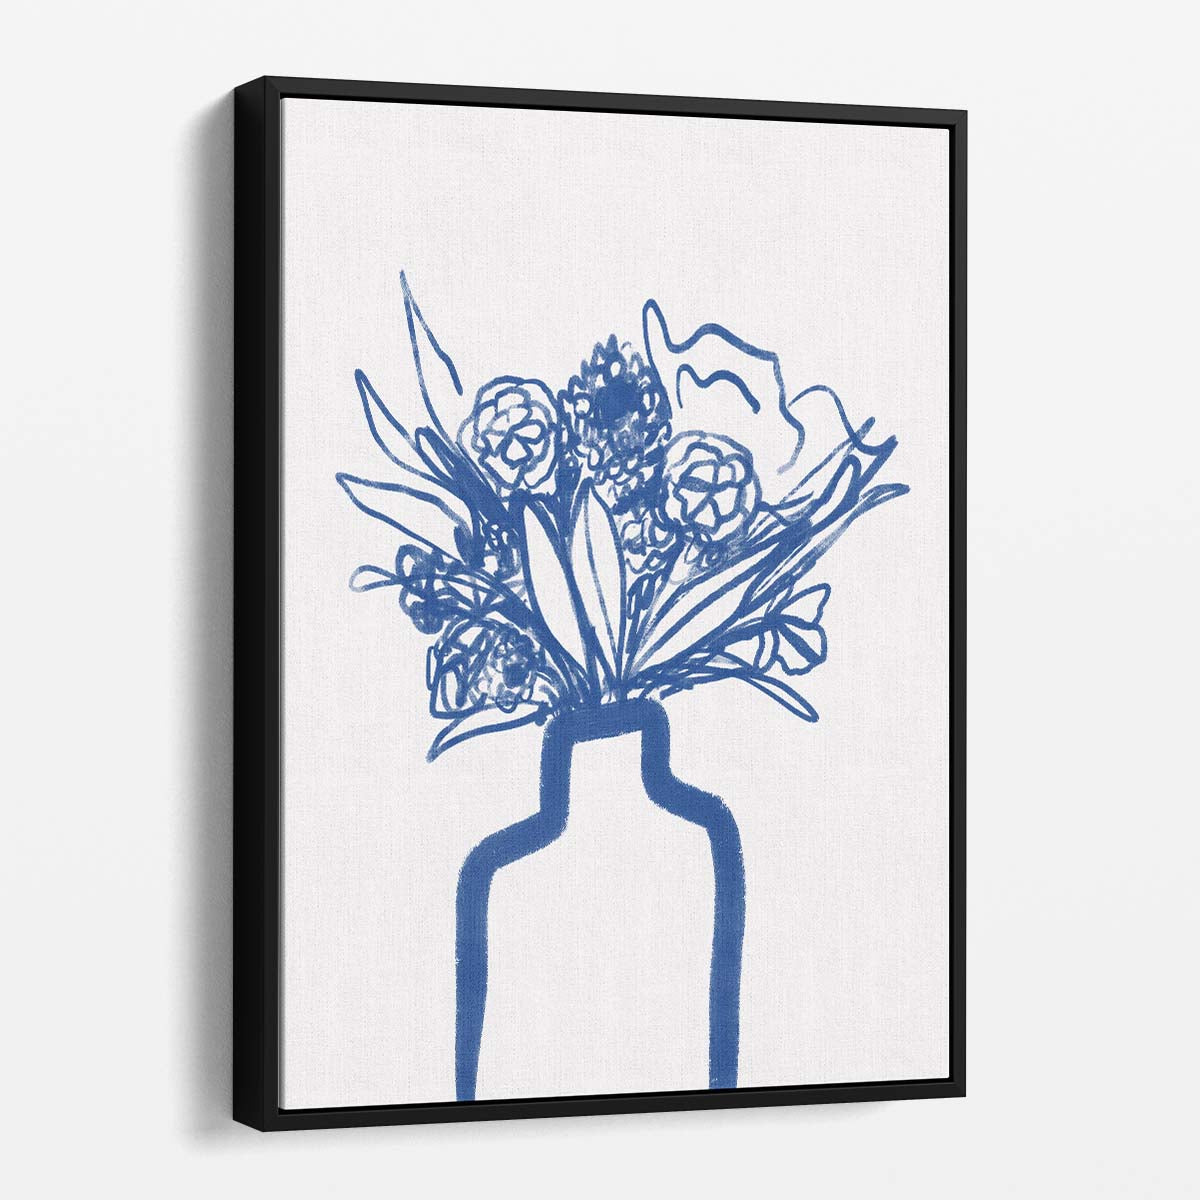 Boho Style Blue Floral Illustration, Hand-Drawn Vase Botanical Wall Art by Luxuriance Designs, made in USA